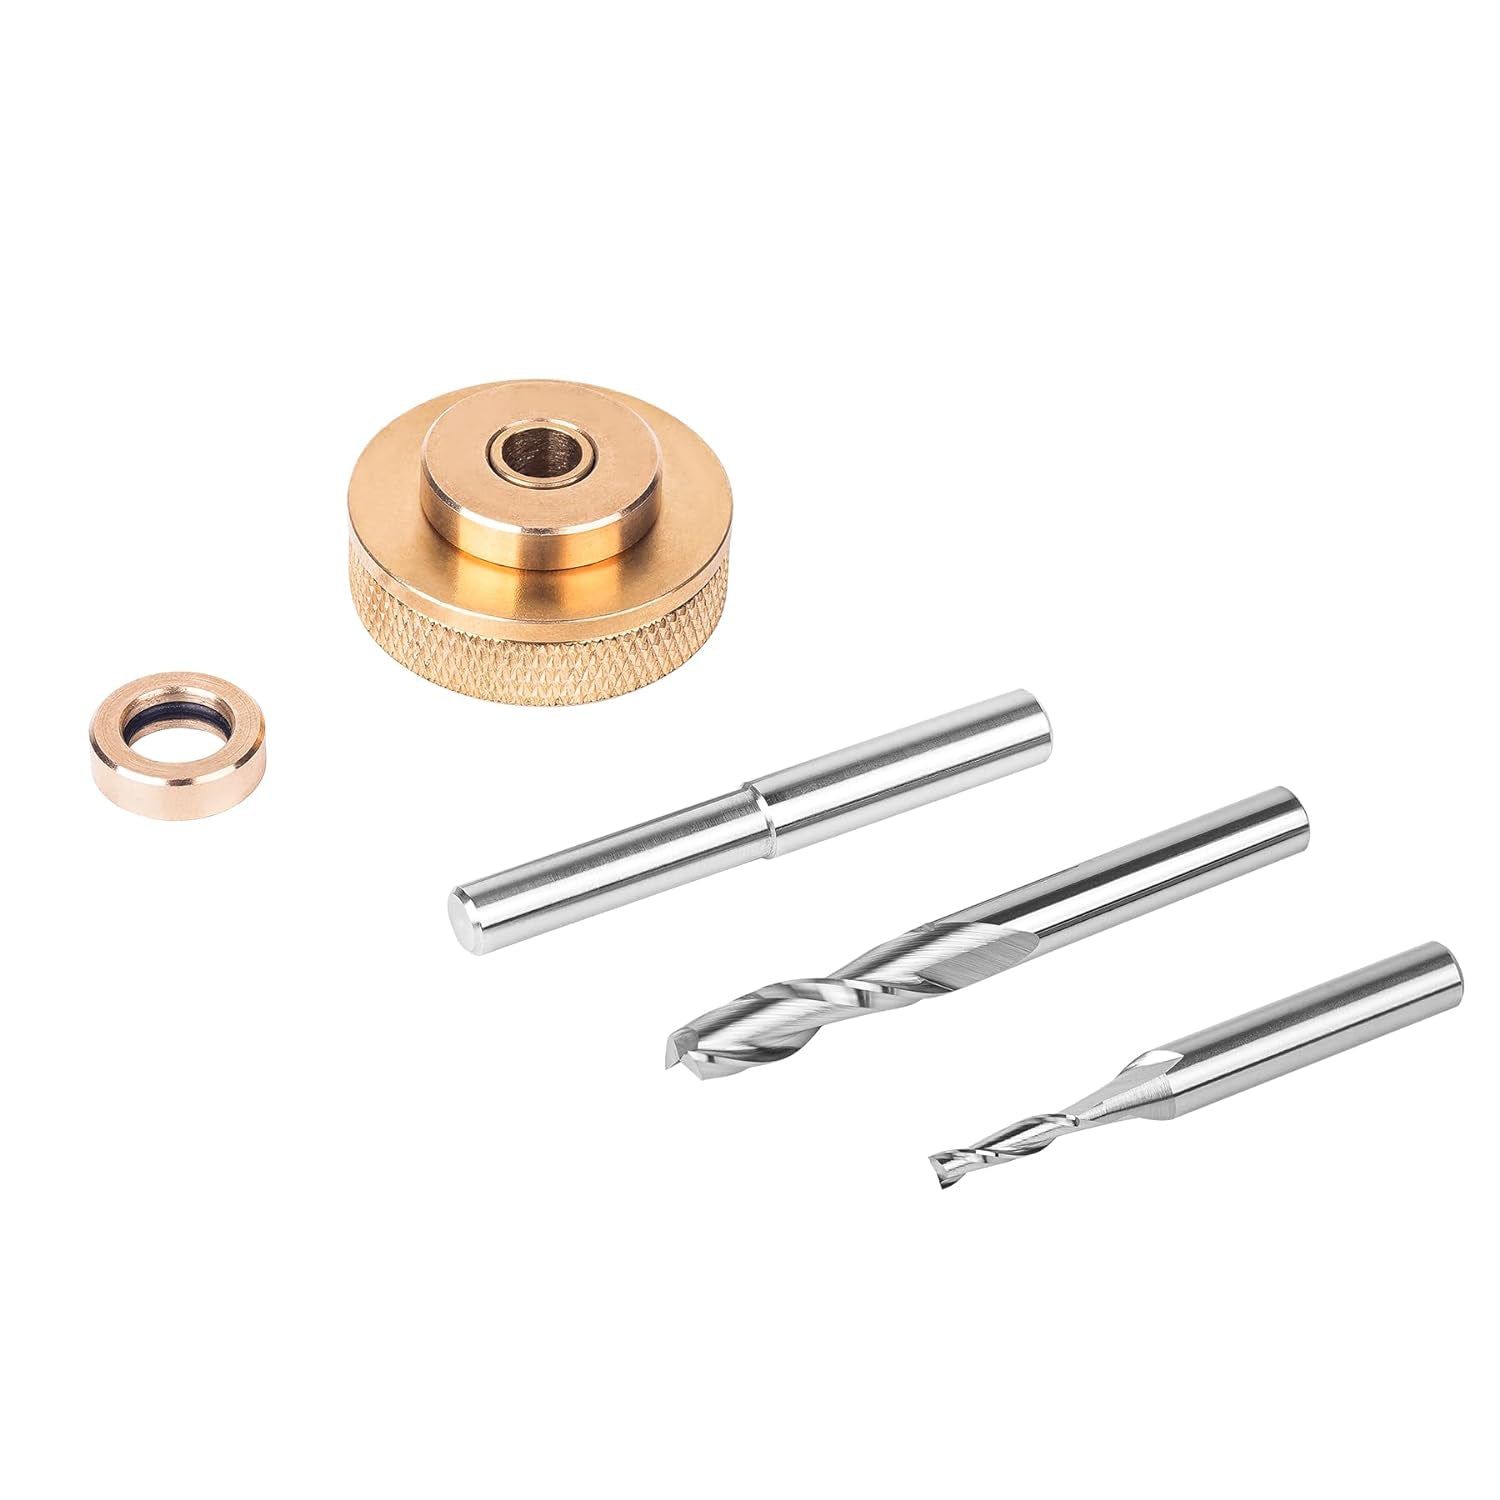 SpeTool O06001 Router Bits Solid Brass Router Inlay Kit